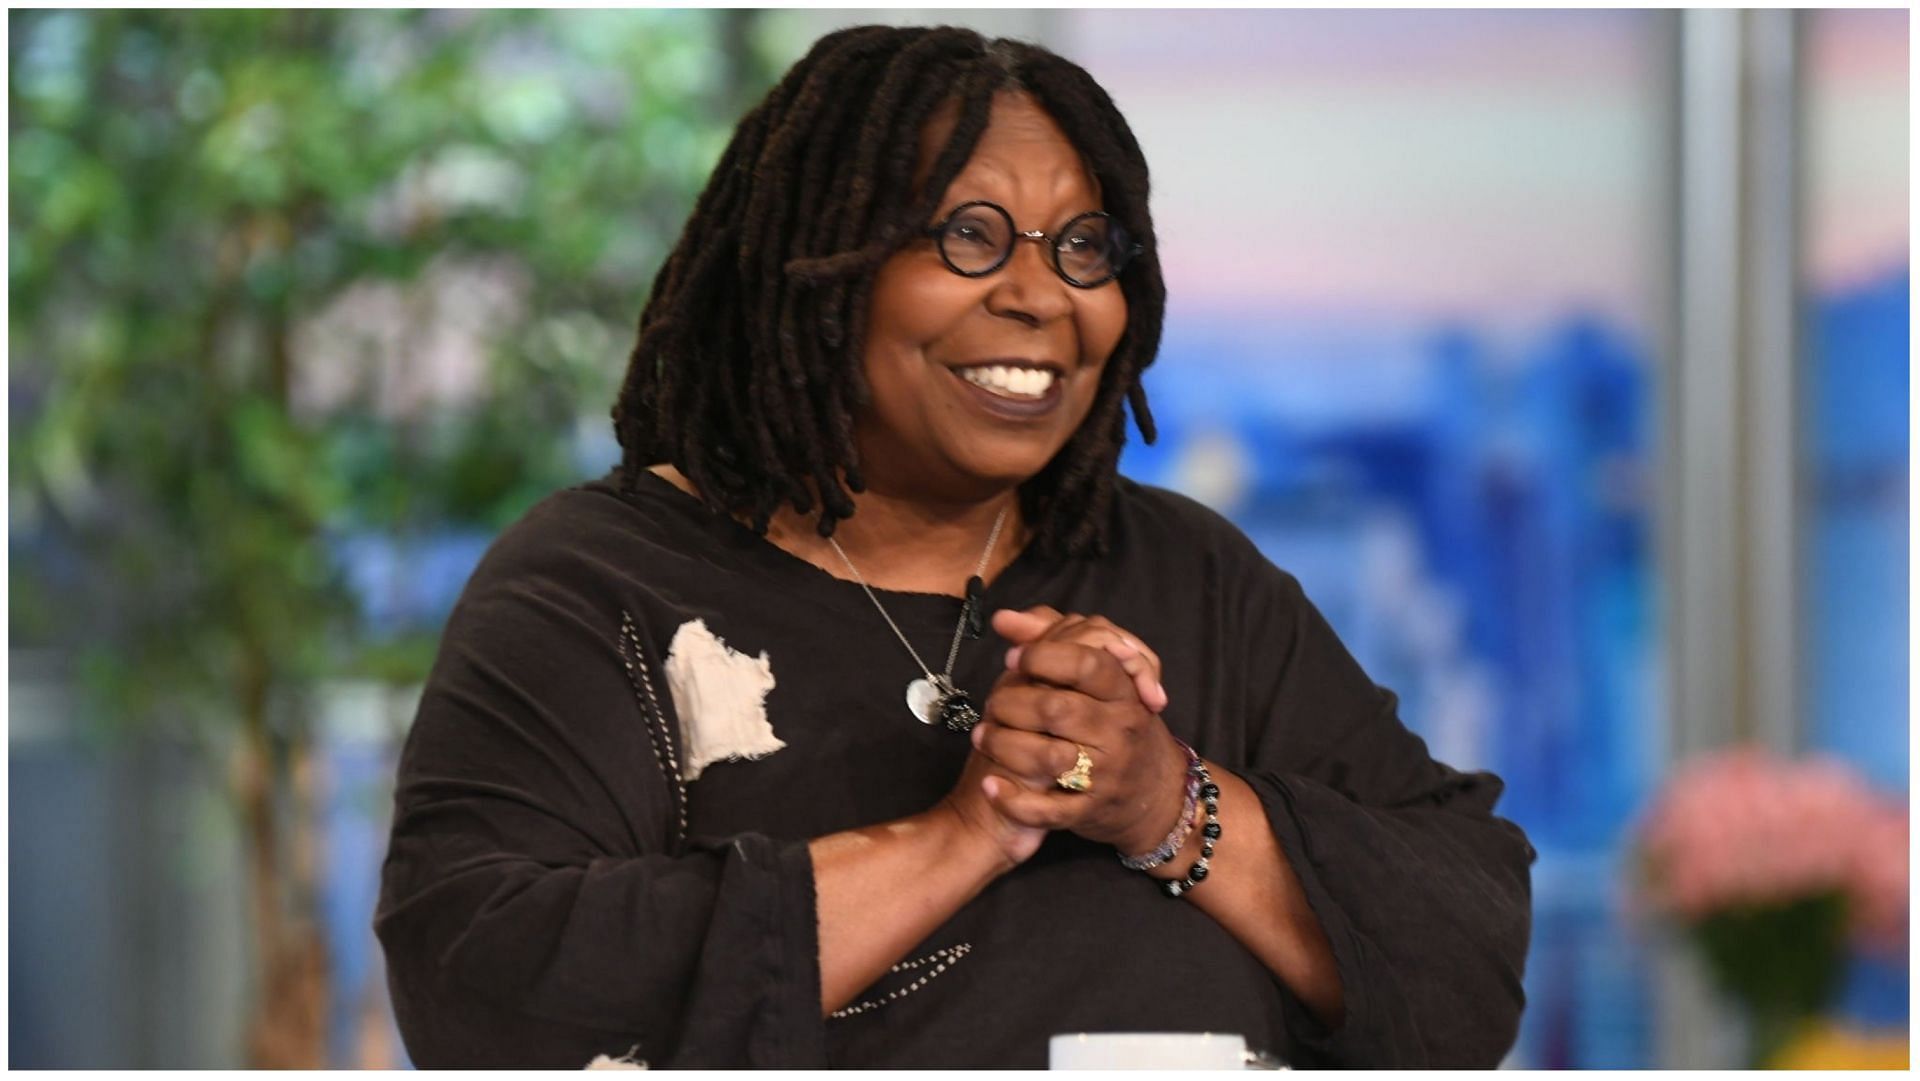 Whoopi Goldberg has been praised for her performance in Till (Image via Jenny Anderson/Getty Images)